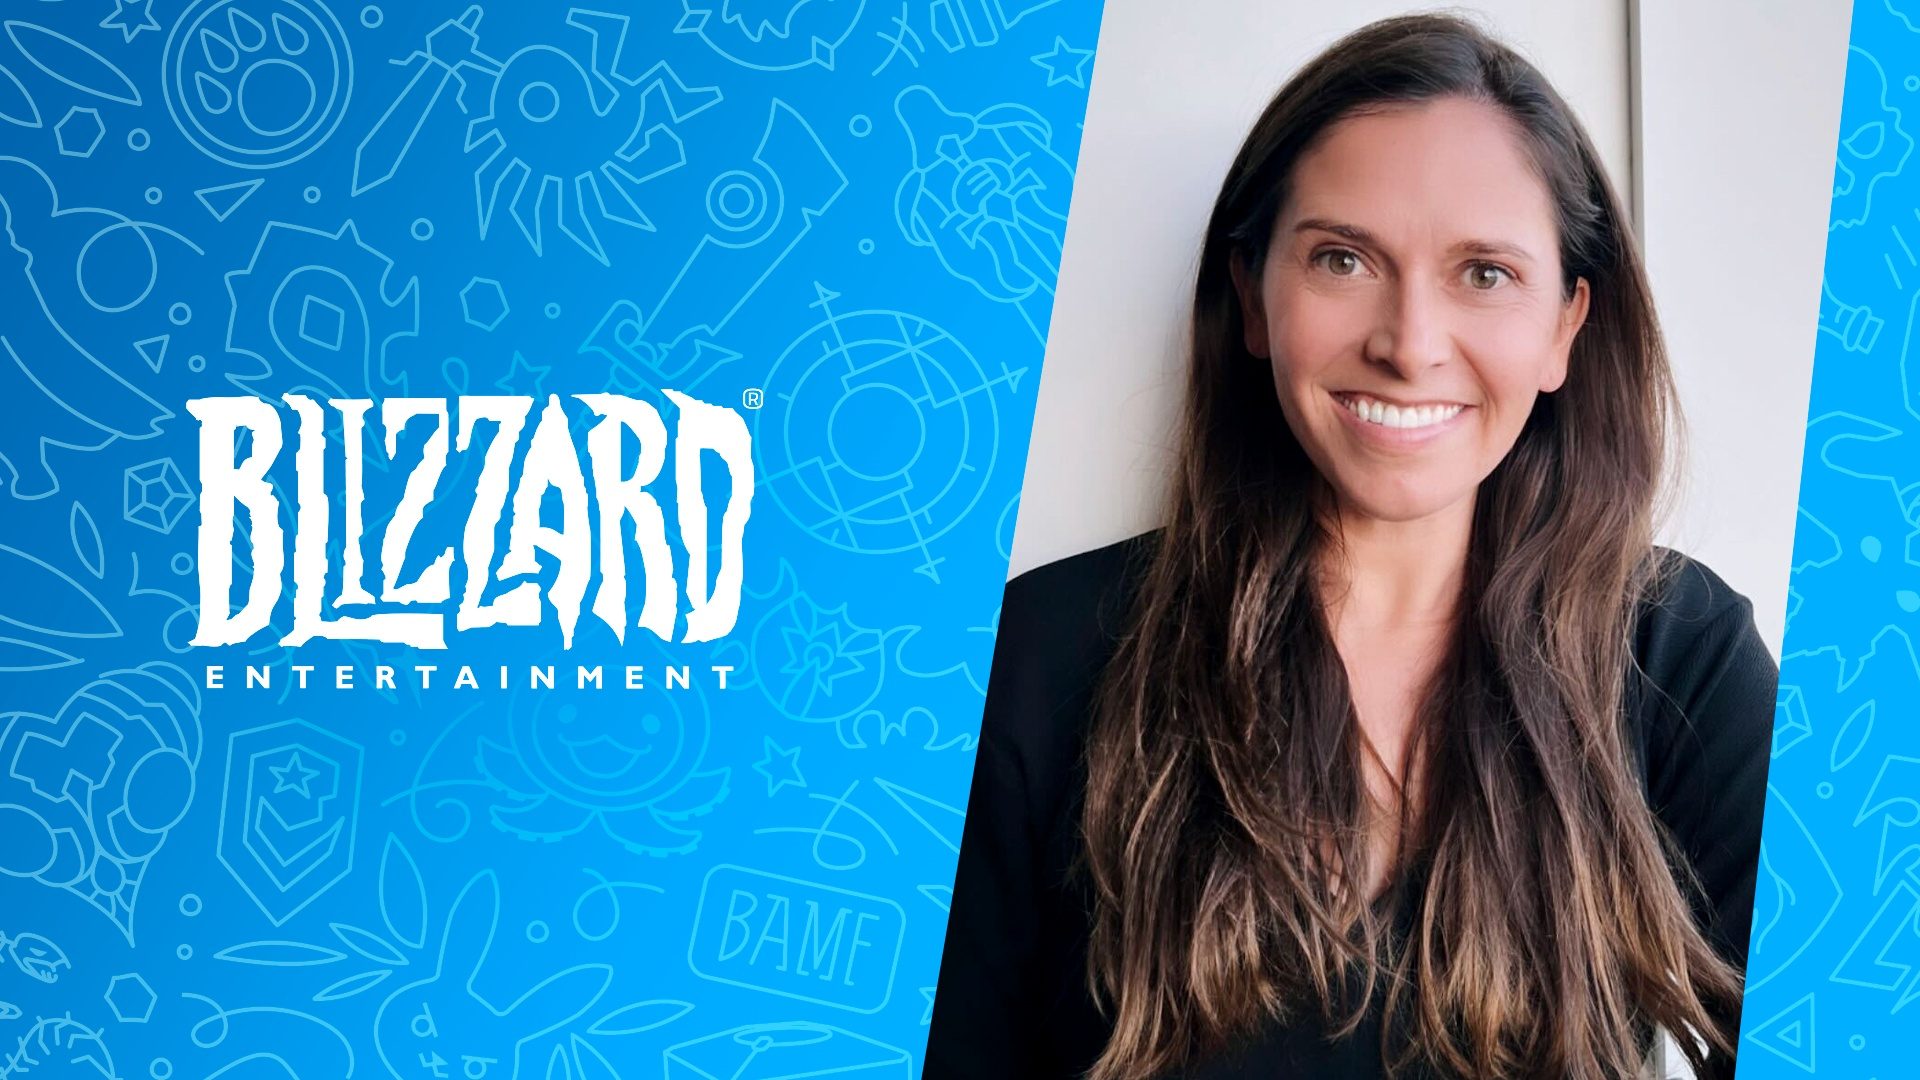 Jessica Martinez becomes Blizzard's first Director of Culture

